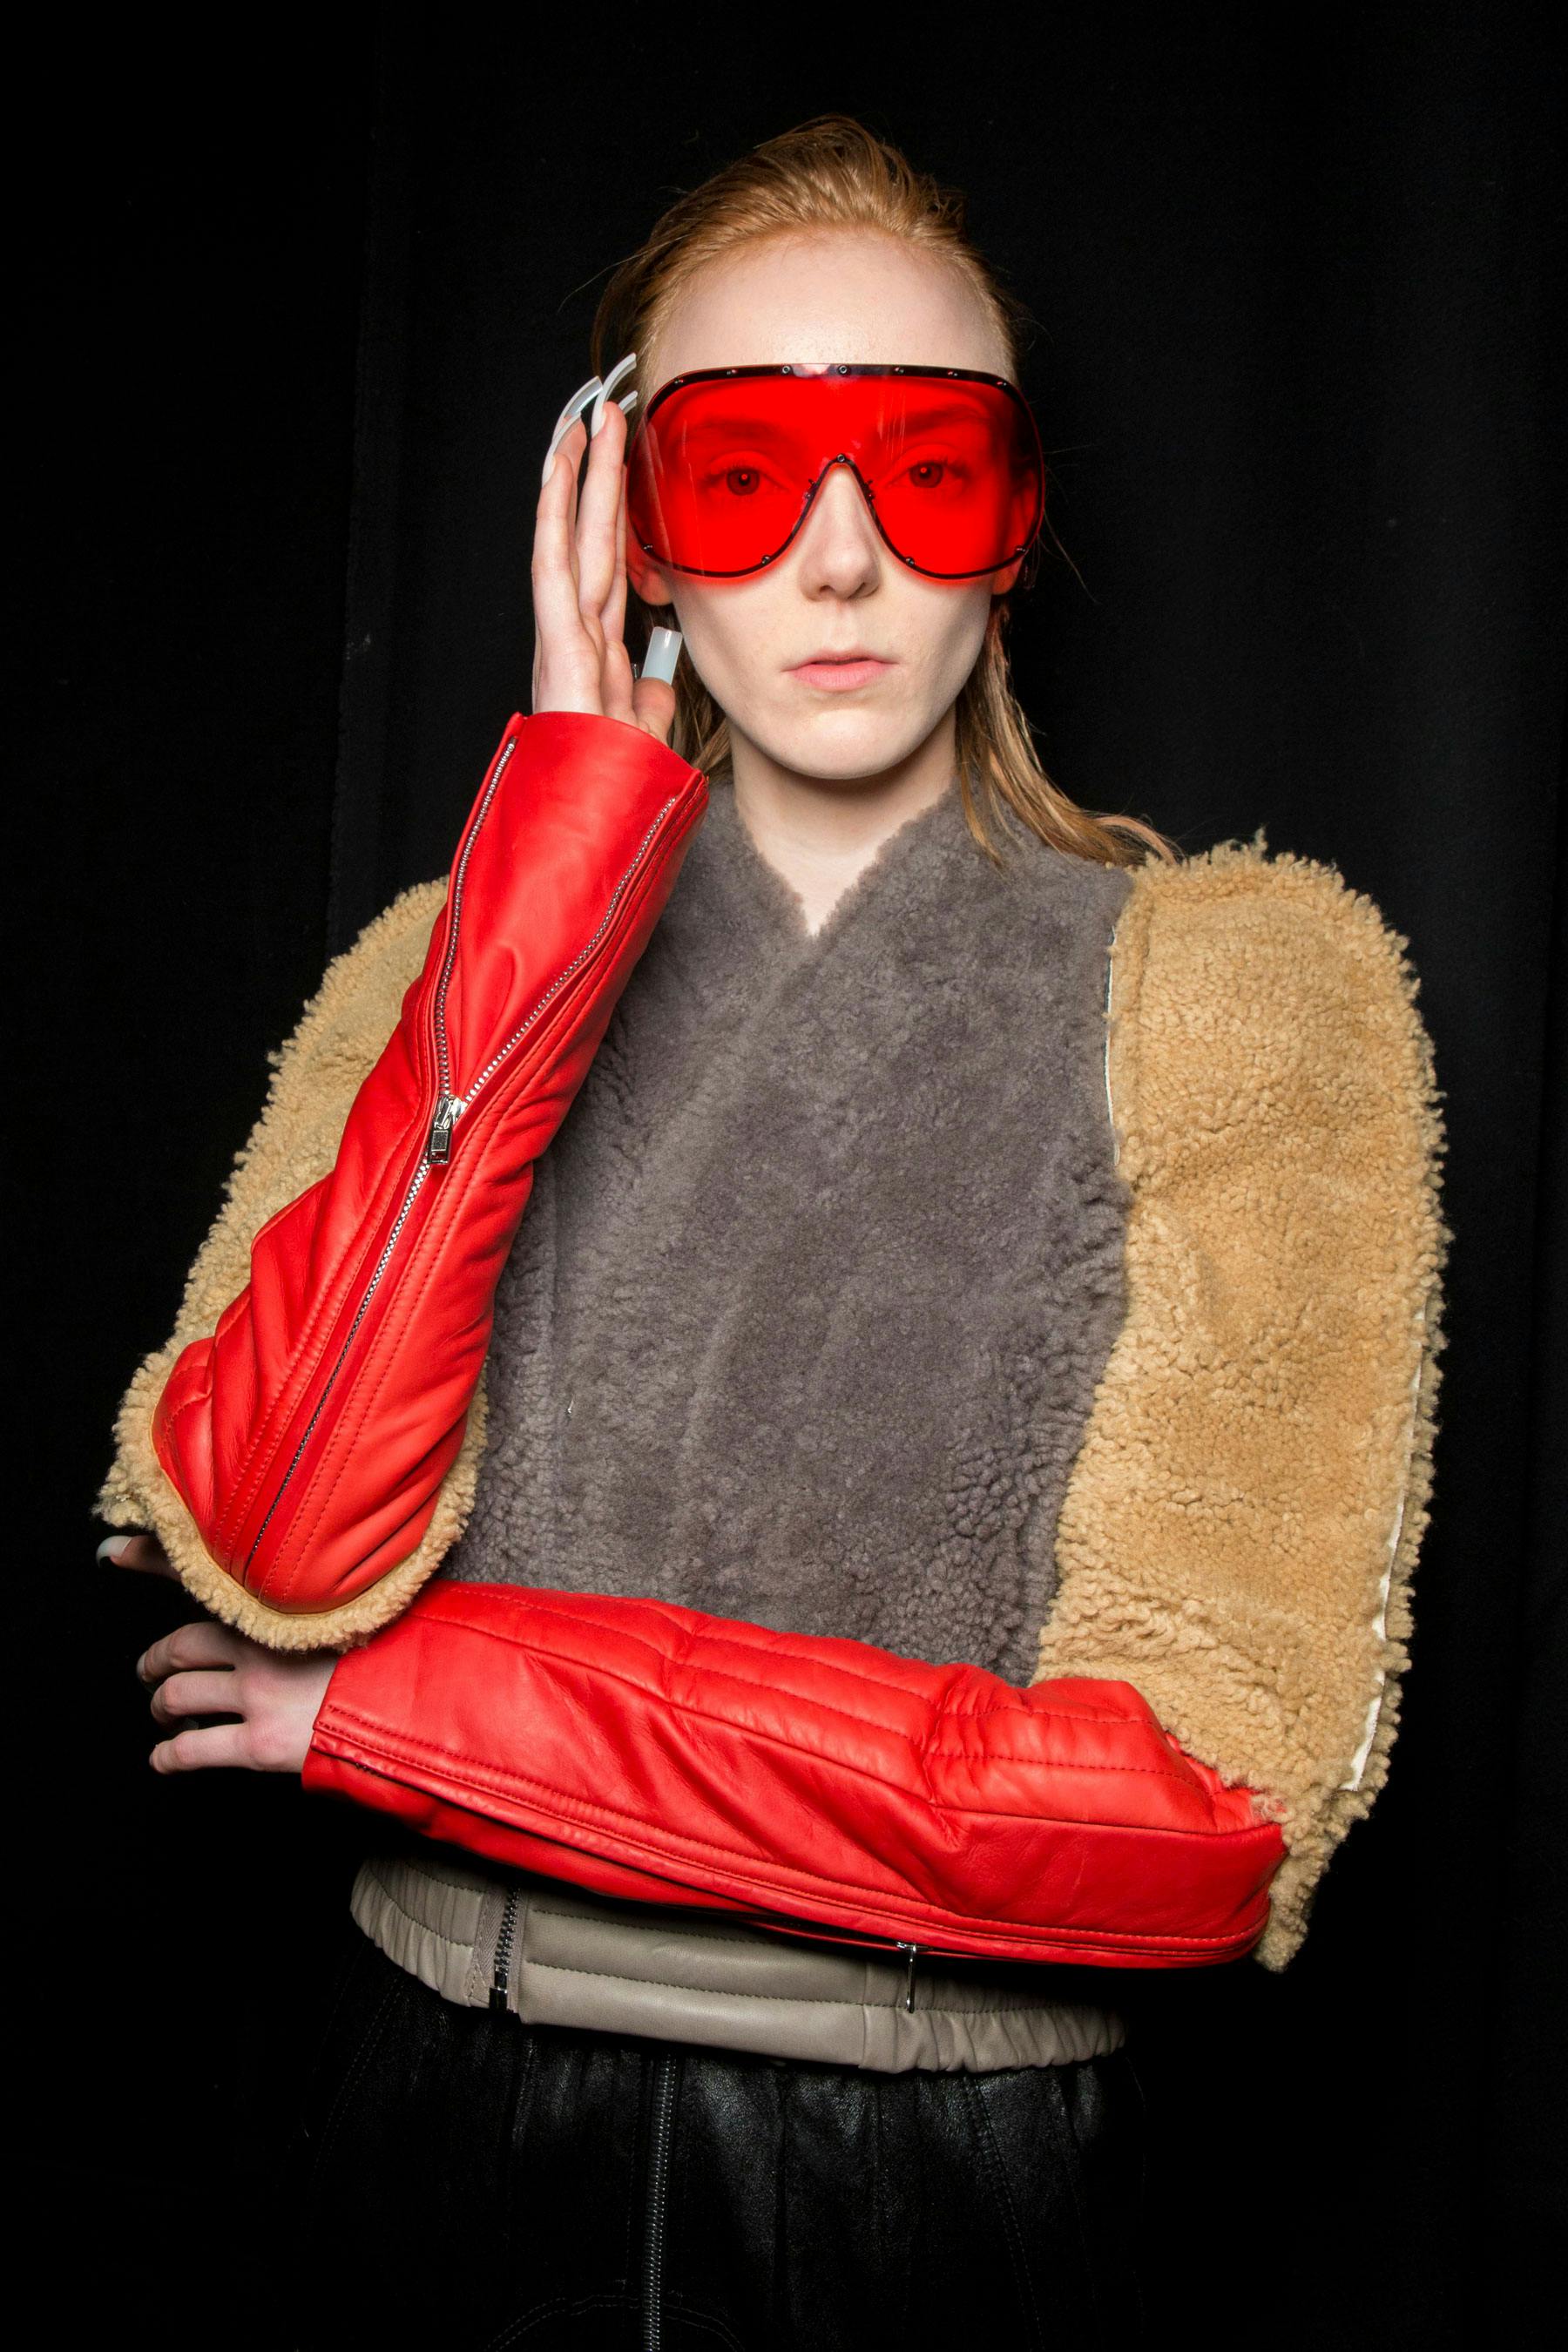 Rick Owens Backstage Red Sheild Sunglasses Multi Colored Sharp Shoulder Sherpa Jacket With Leather Sleeves Womens FW19 Larry